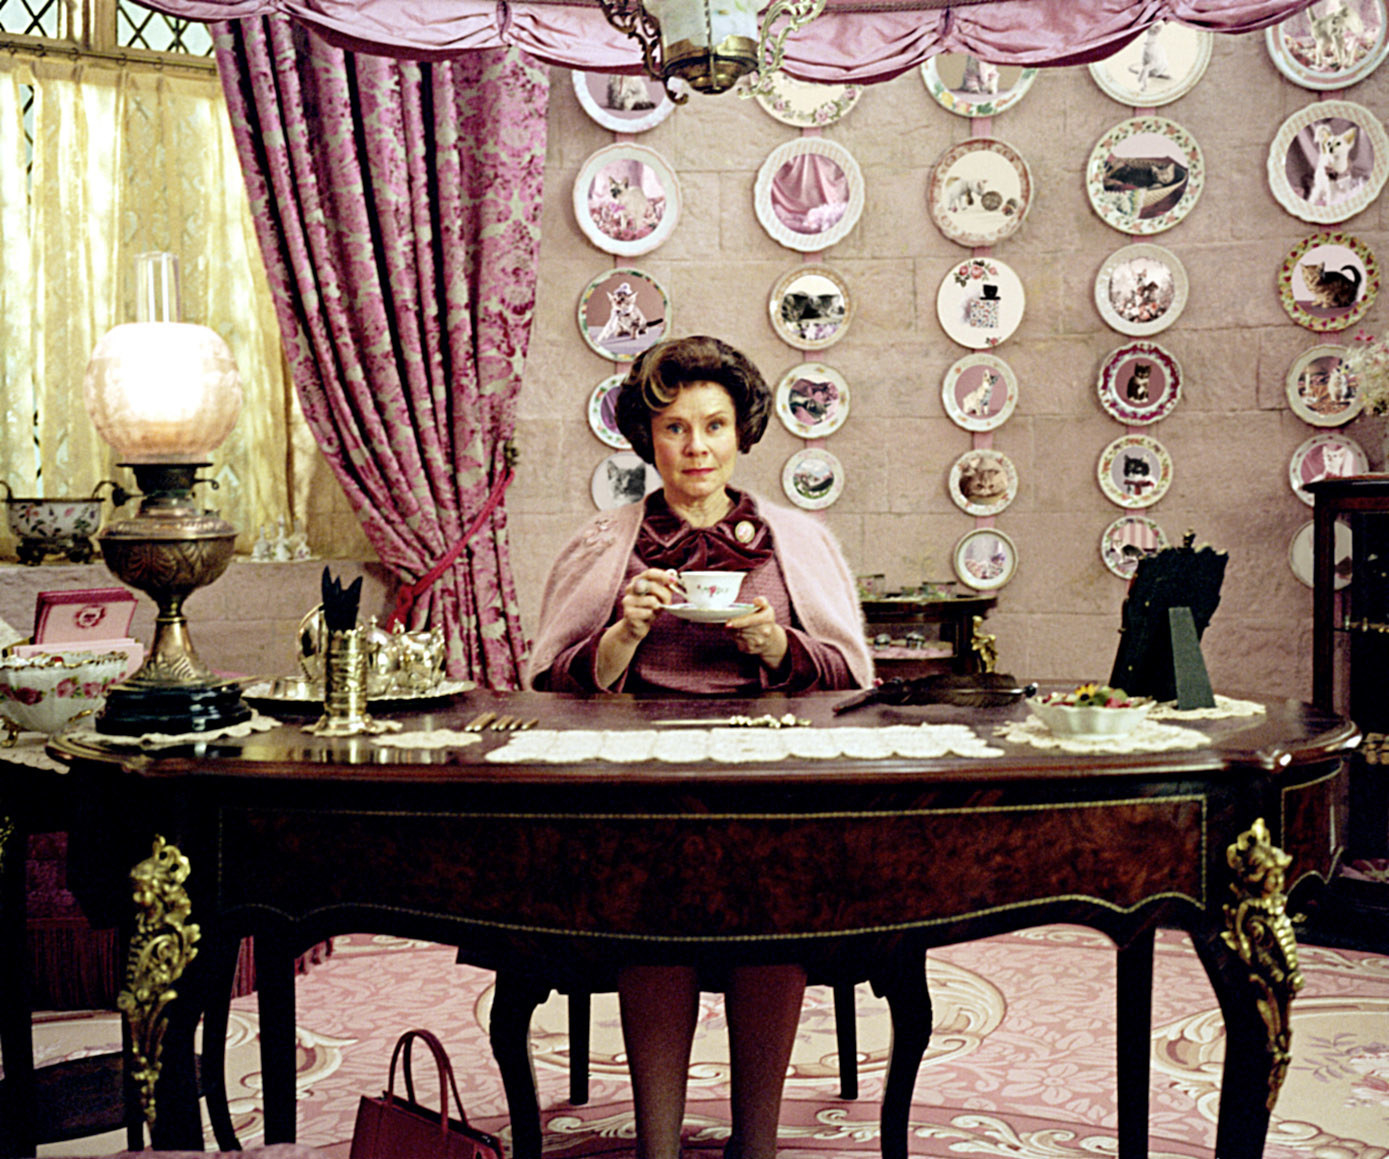 Dolores drinking tea in her office that&#x27;s entirely pink, has antique furniture, and tons of decorative plates with cats on them